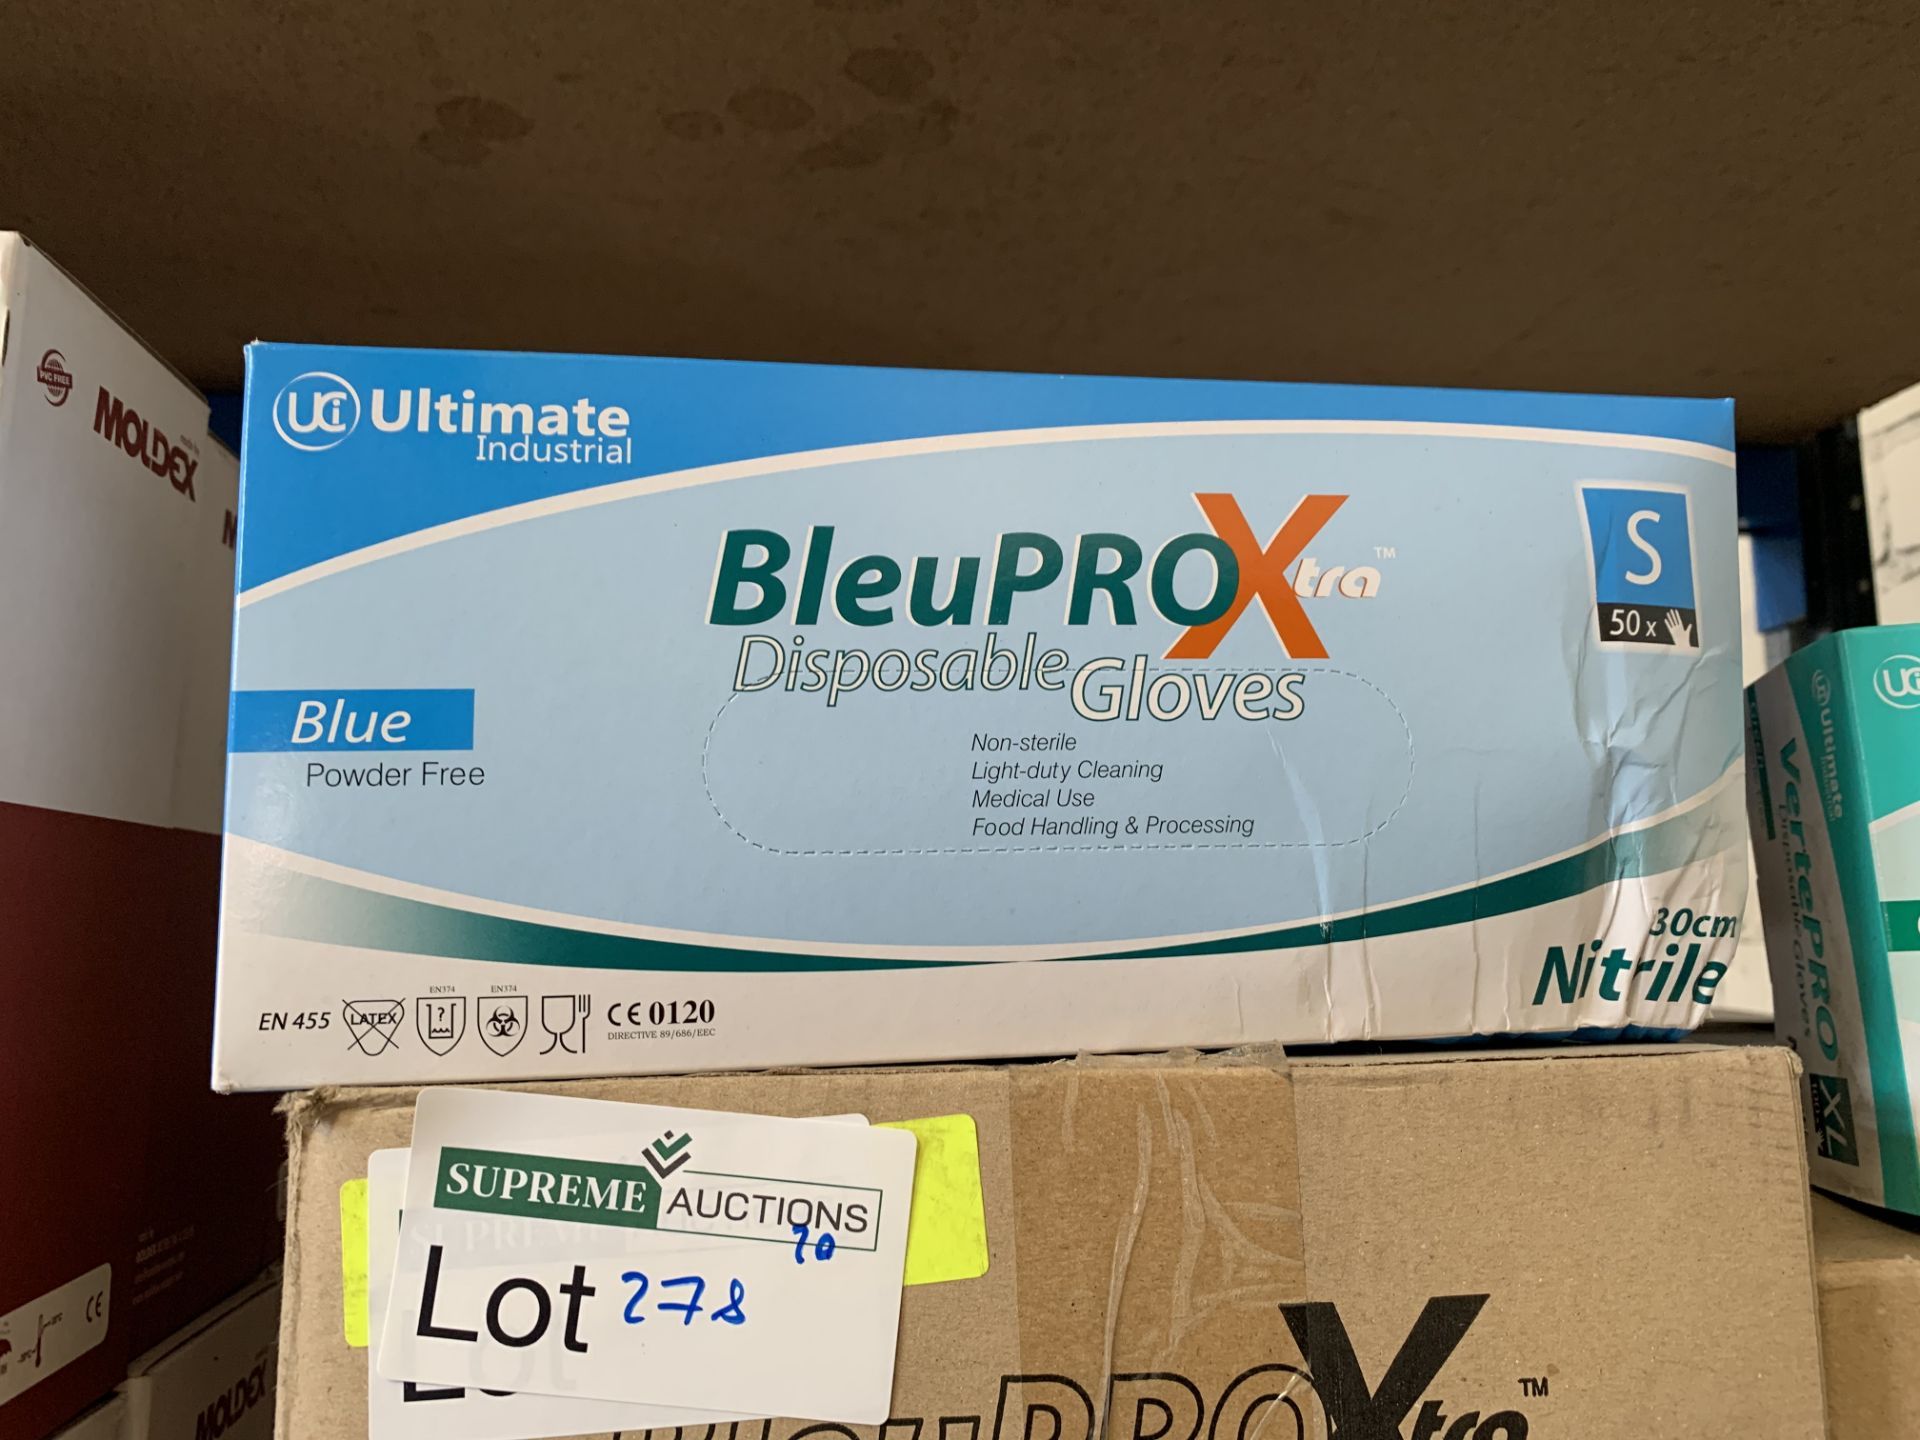 10 X PACKS OF 50 BLEUPRO XTRA DISPOSABLE GLOVES (278/20)